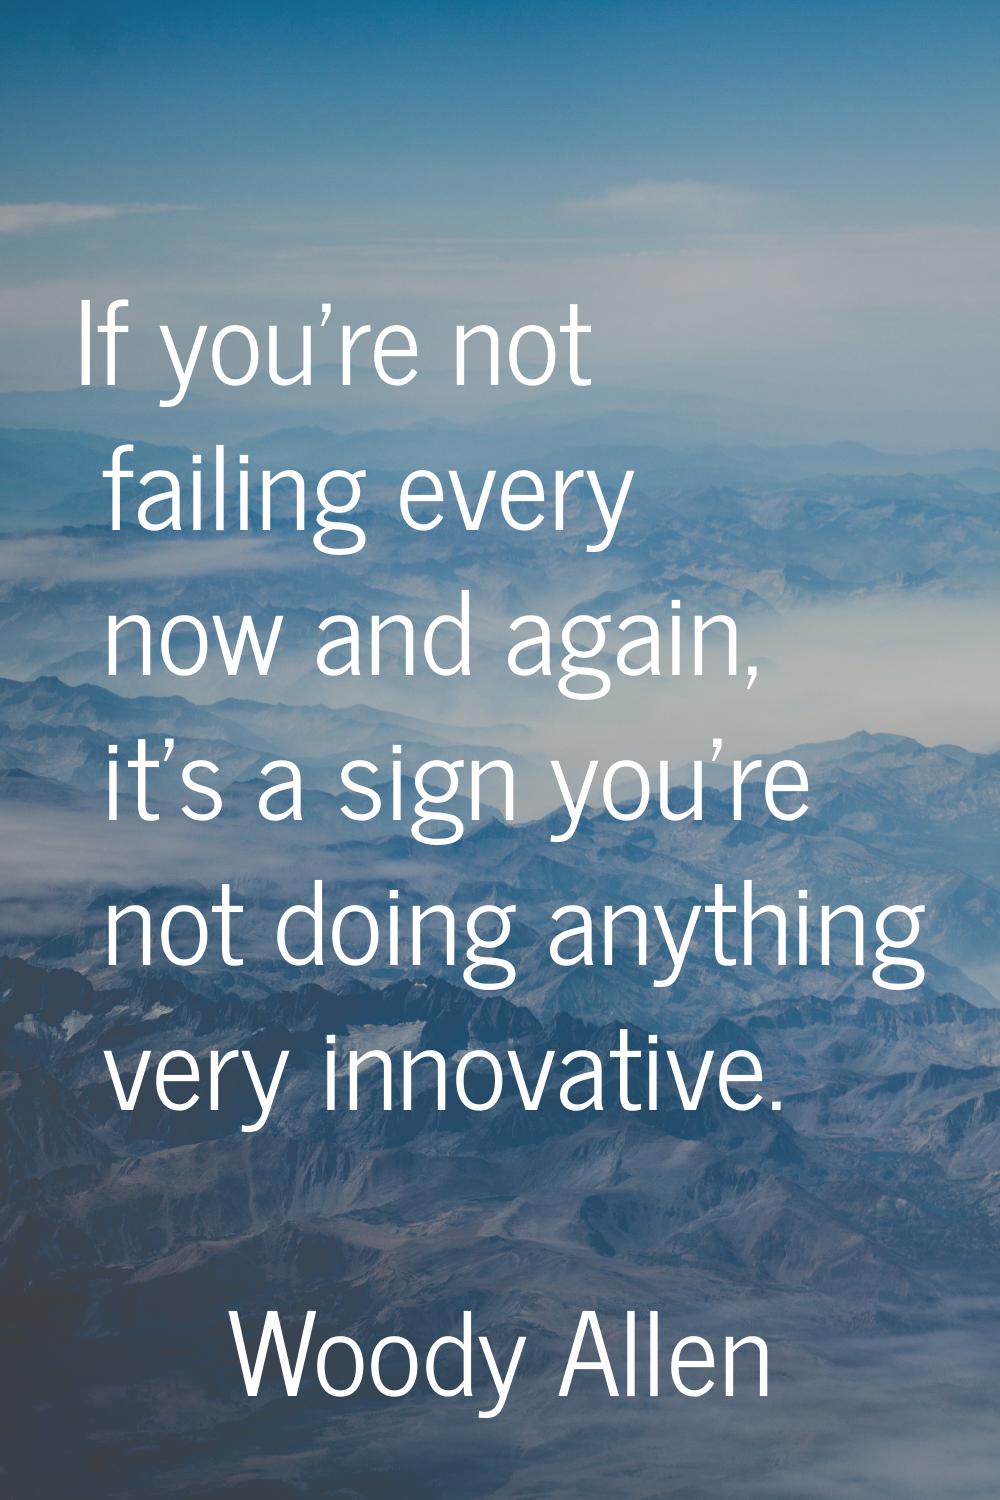 If you're not failing every now and again, it's a sign you're not doing anything very innovative.